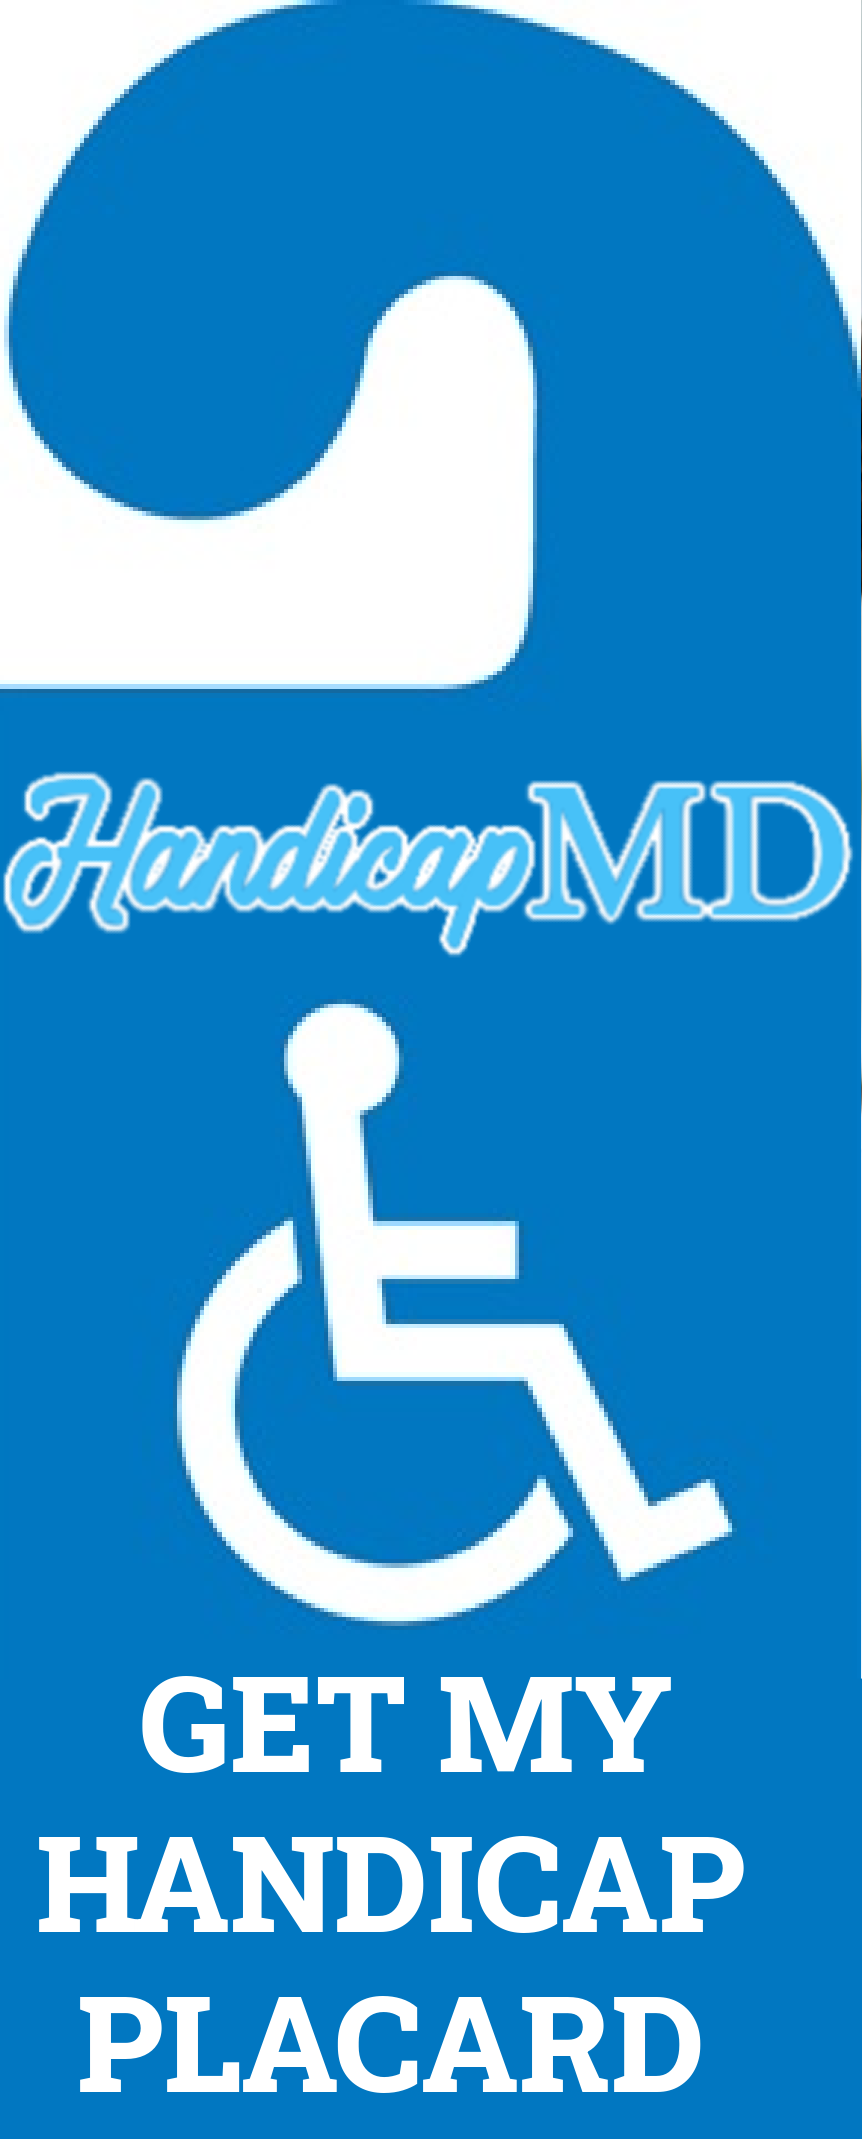 Tips for Displaying Your Handicap Placard Correctly in Delaware